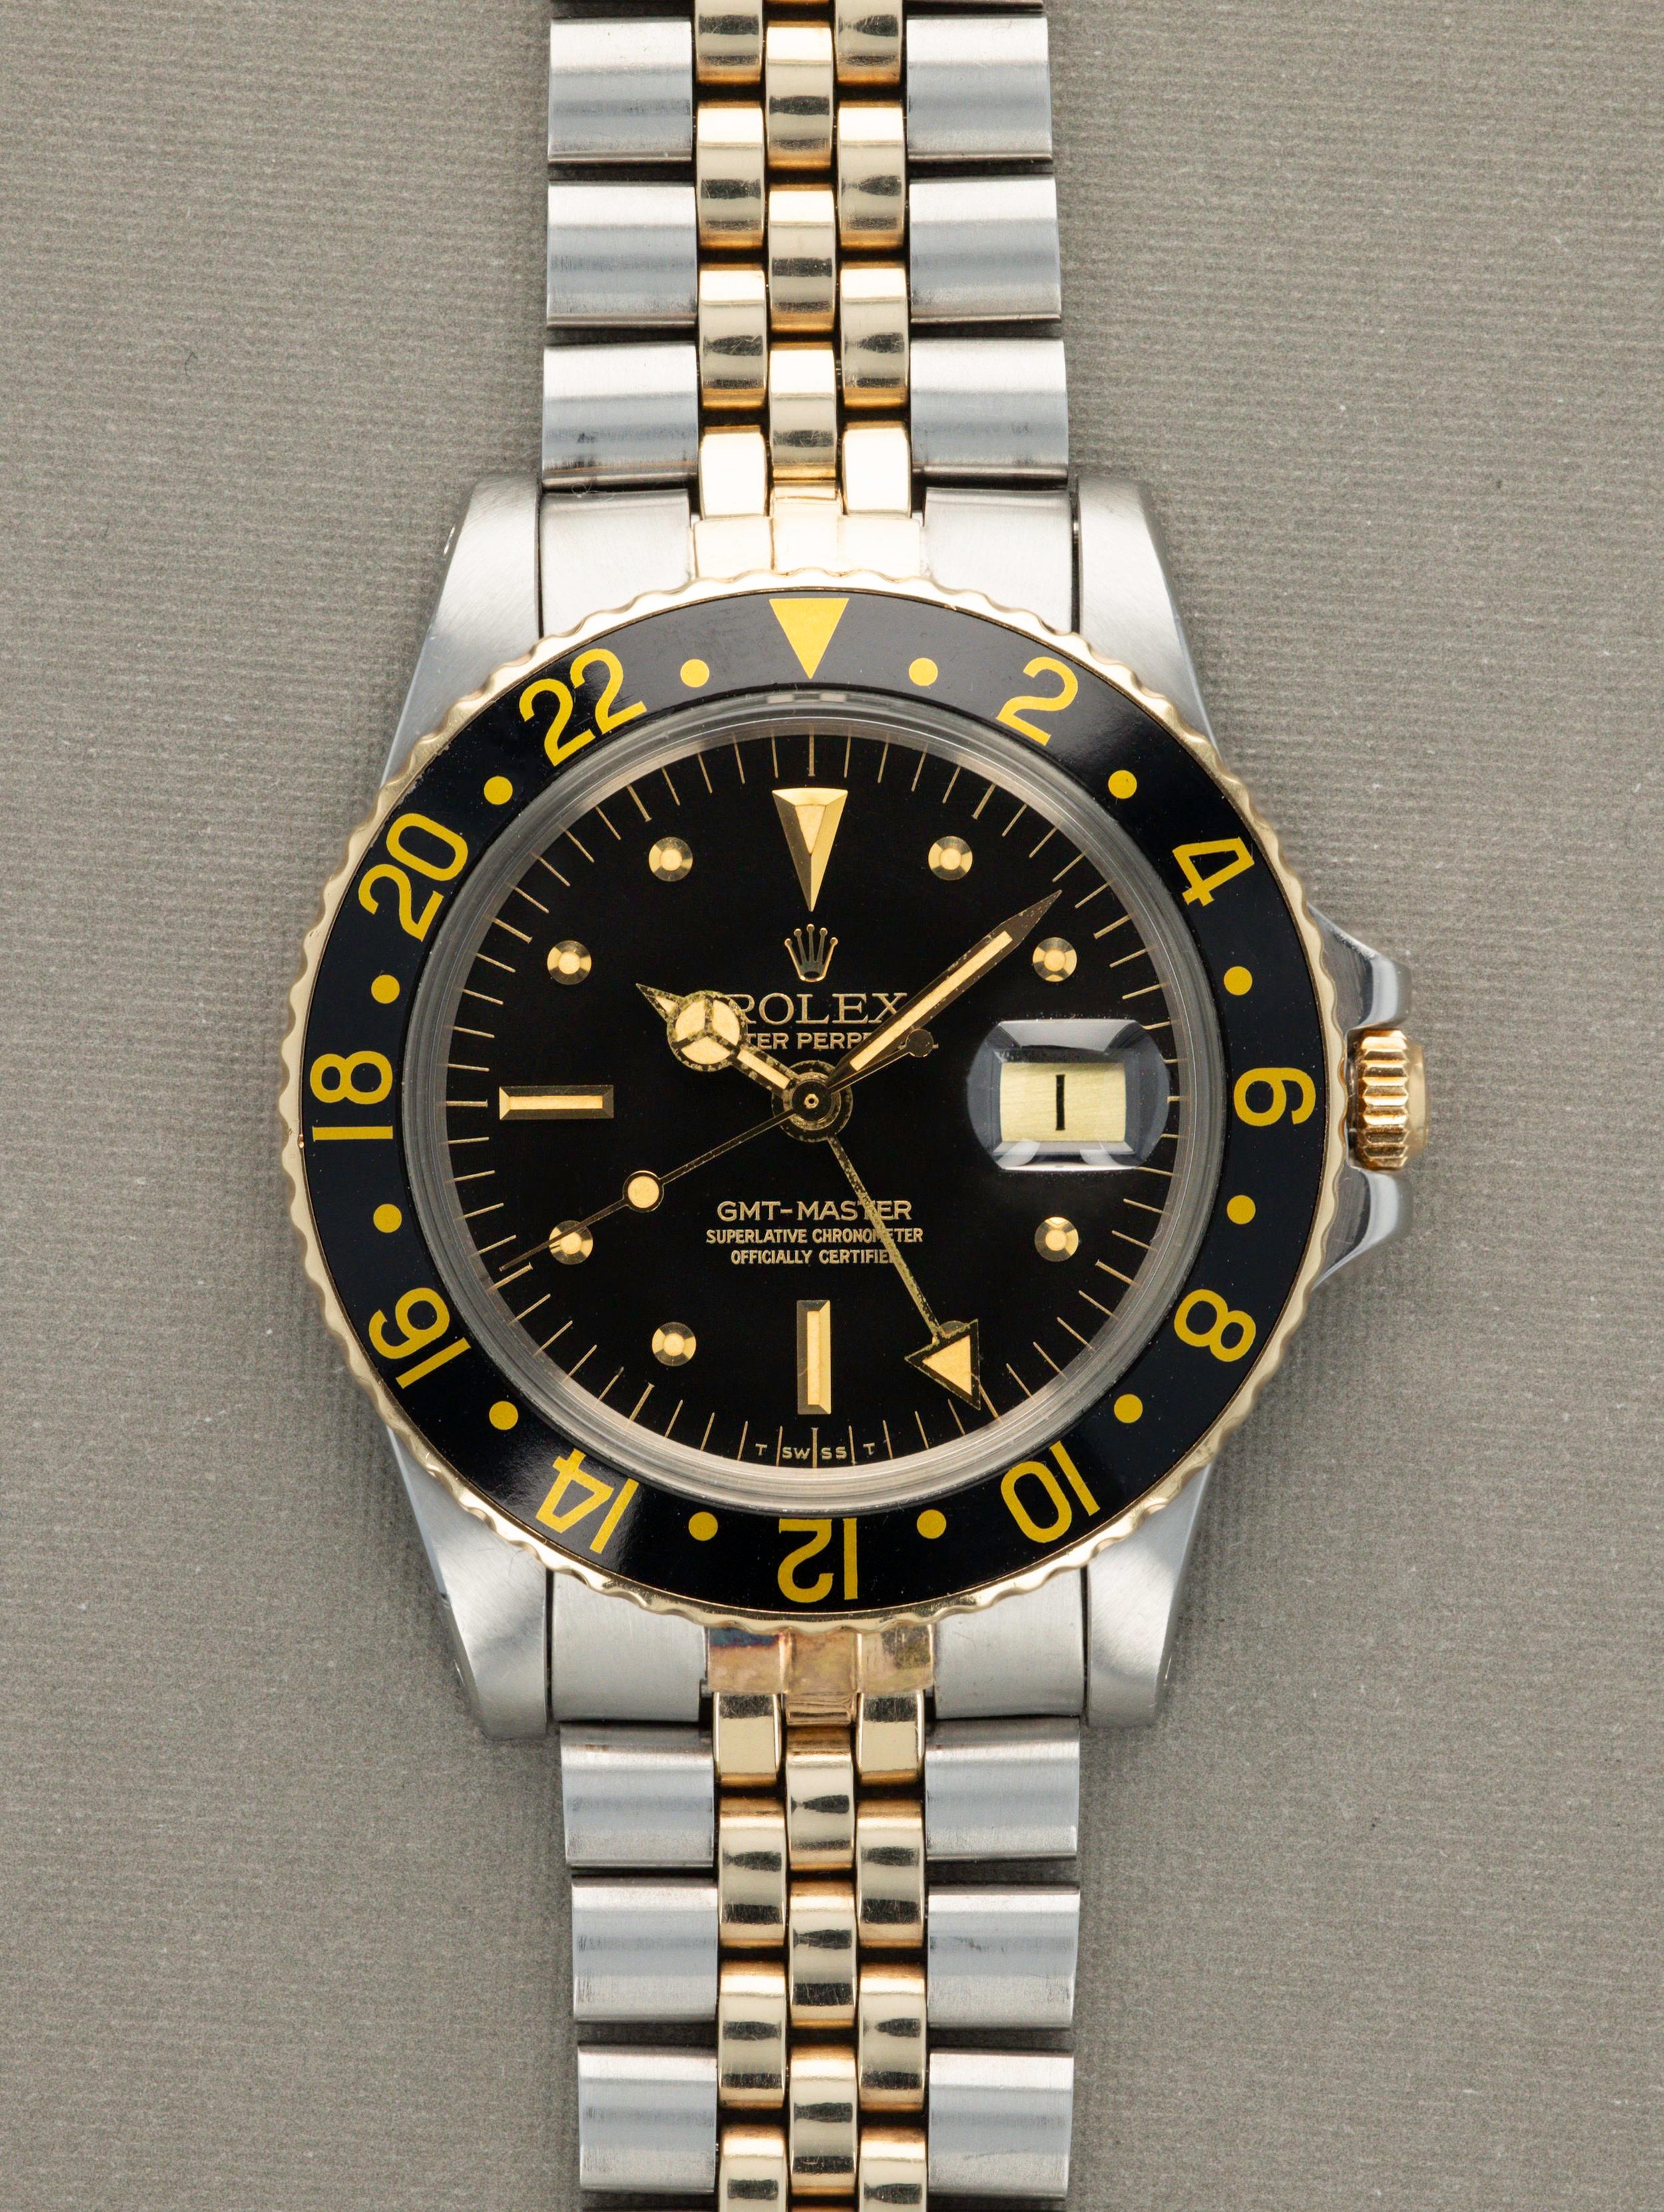 Rolex GMT-Master Ref. 1675/3 - Two-Tone Nipple Dial